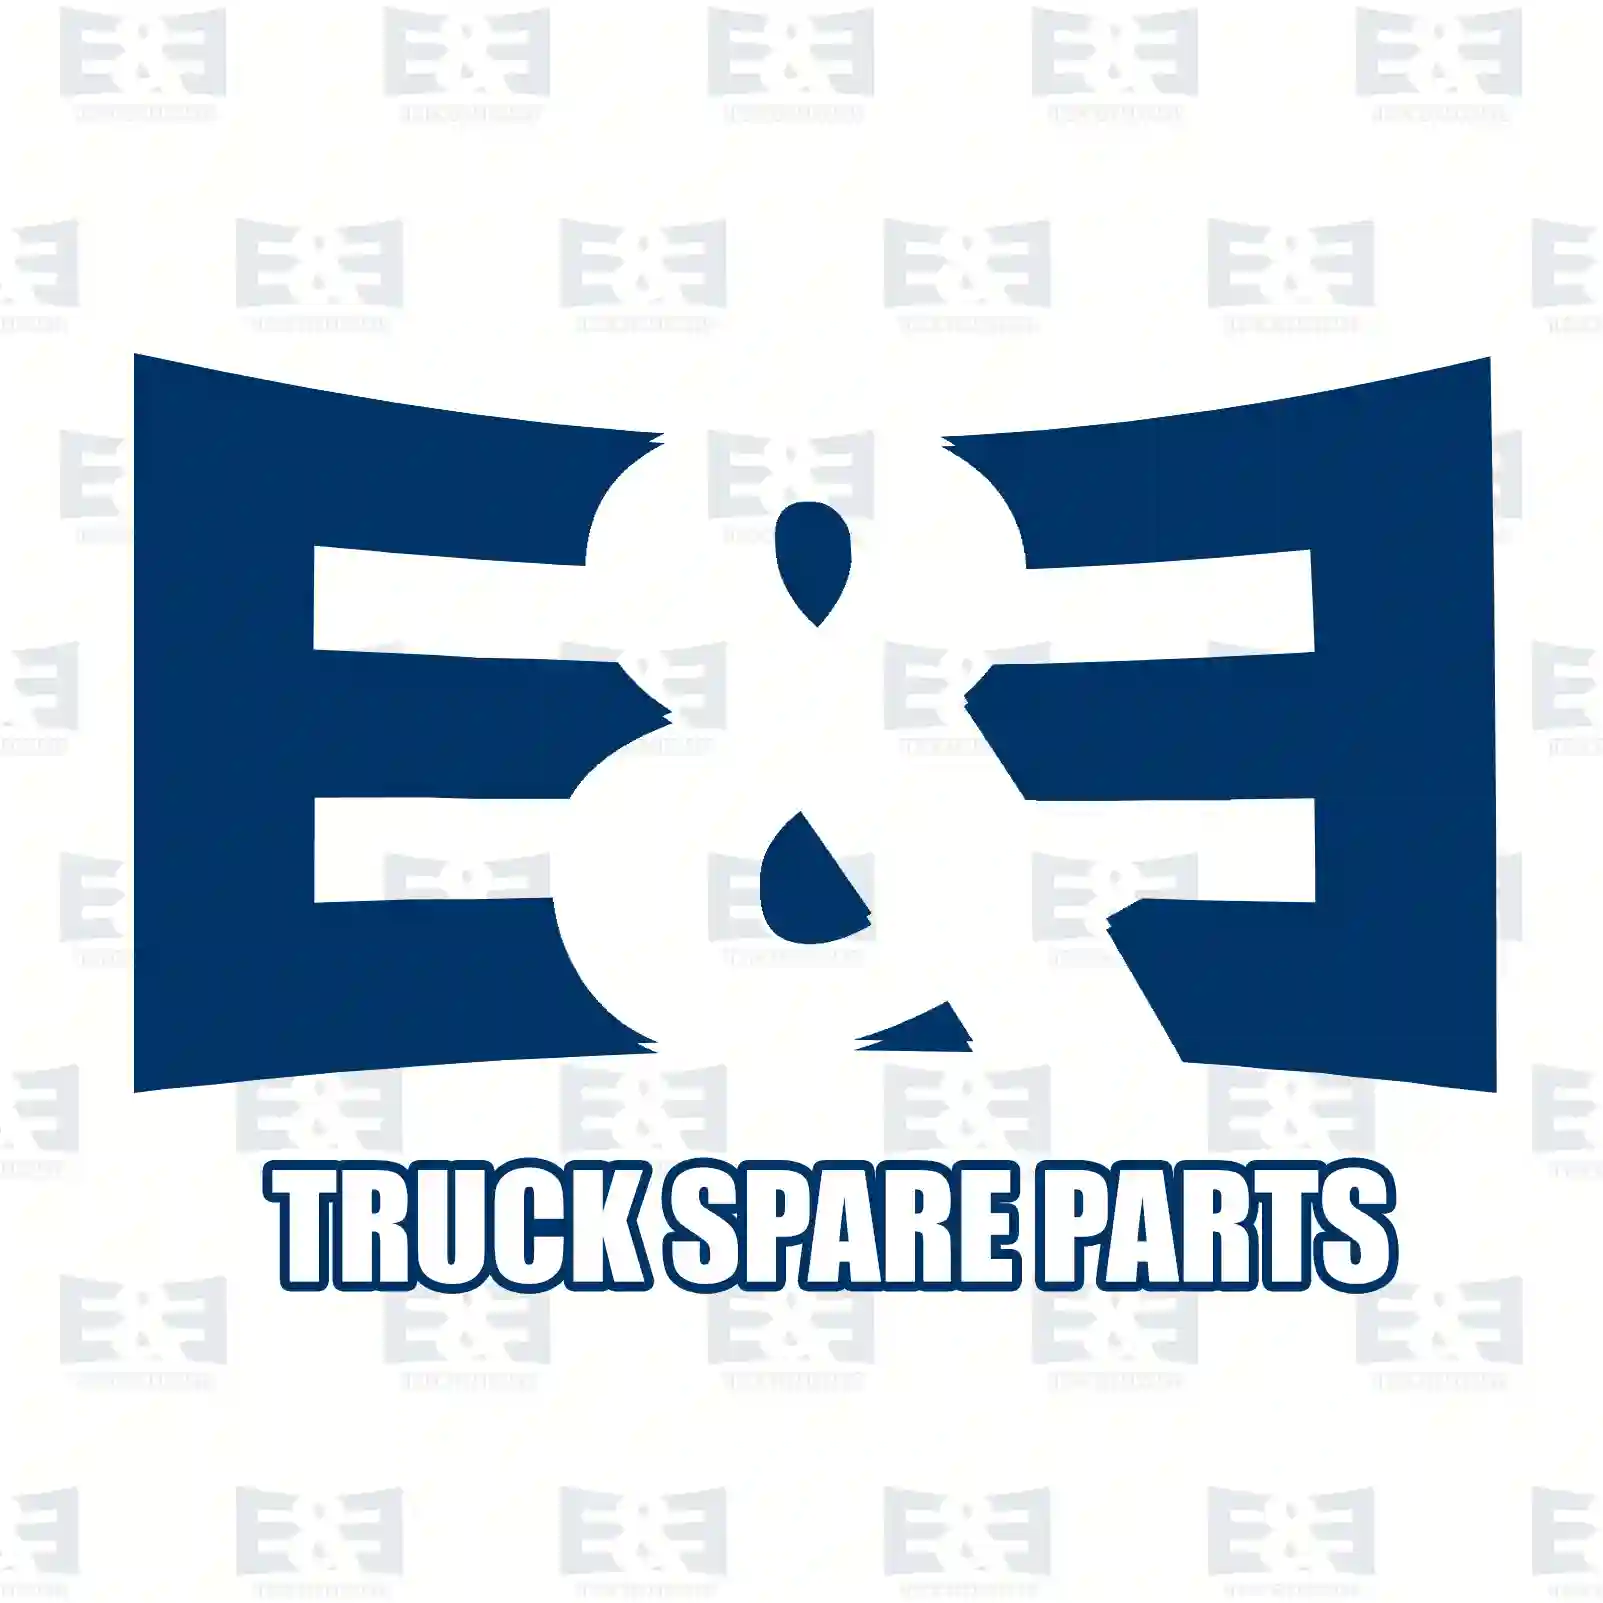  Charge air pipe || E&E Truck Spare Parts | Truck Spare Parts, Auotomotive Spare Parts